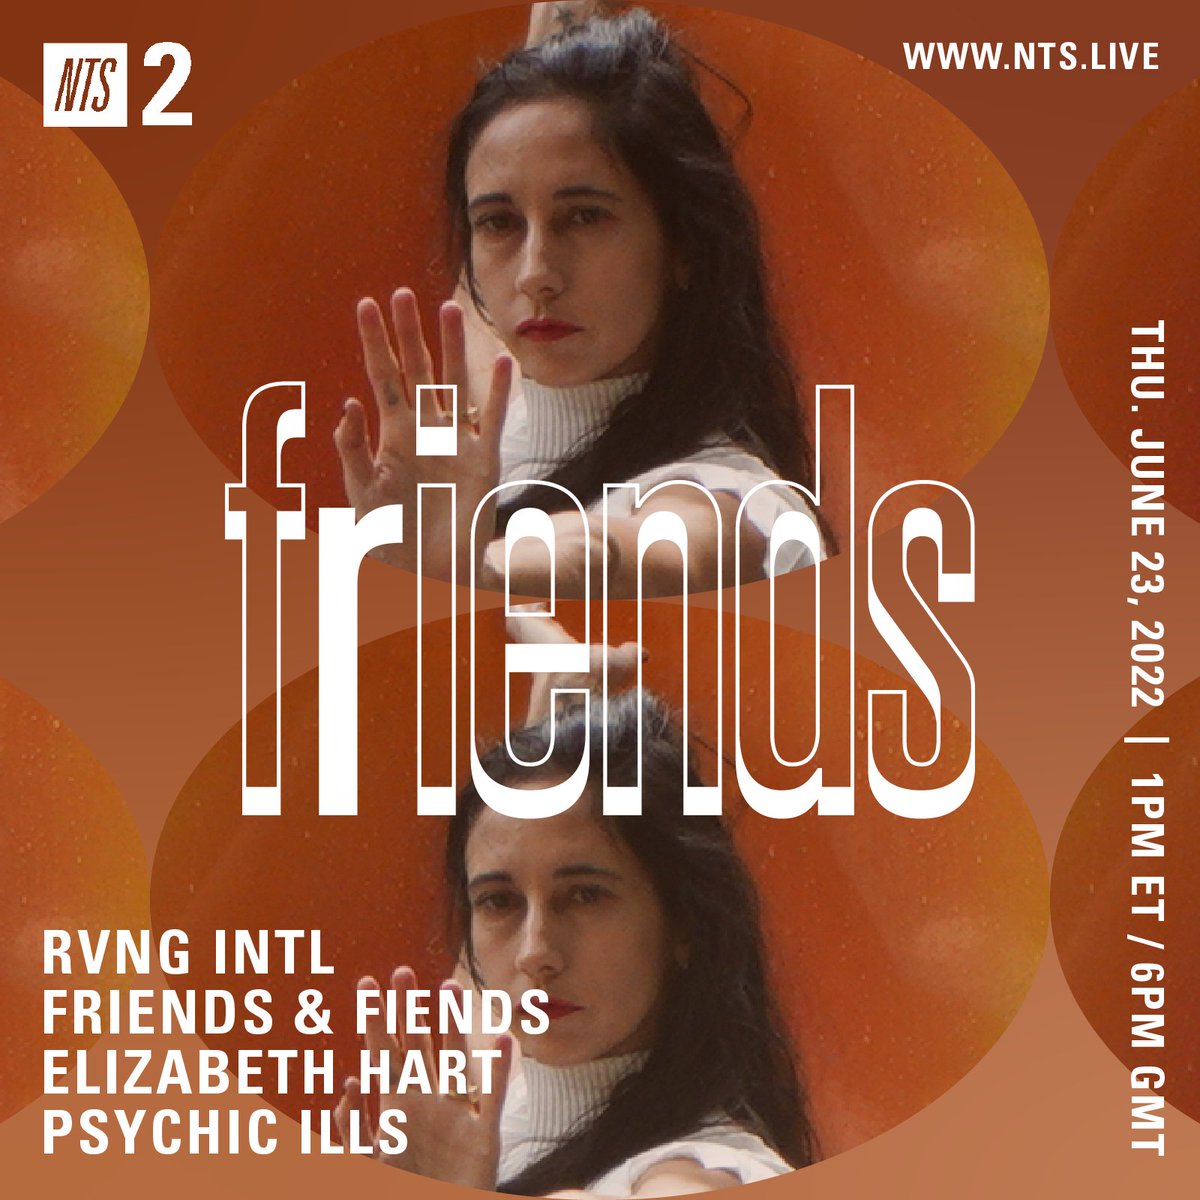 Elizabeth Hart of @psychicills takes over this month's @rvngintl Friends & Fiends - listen now: nts.live/2